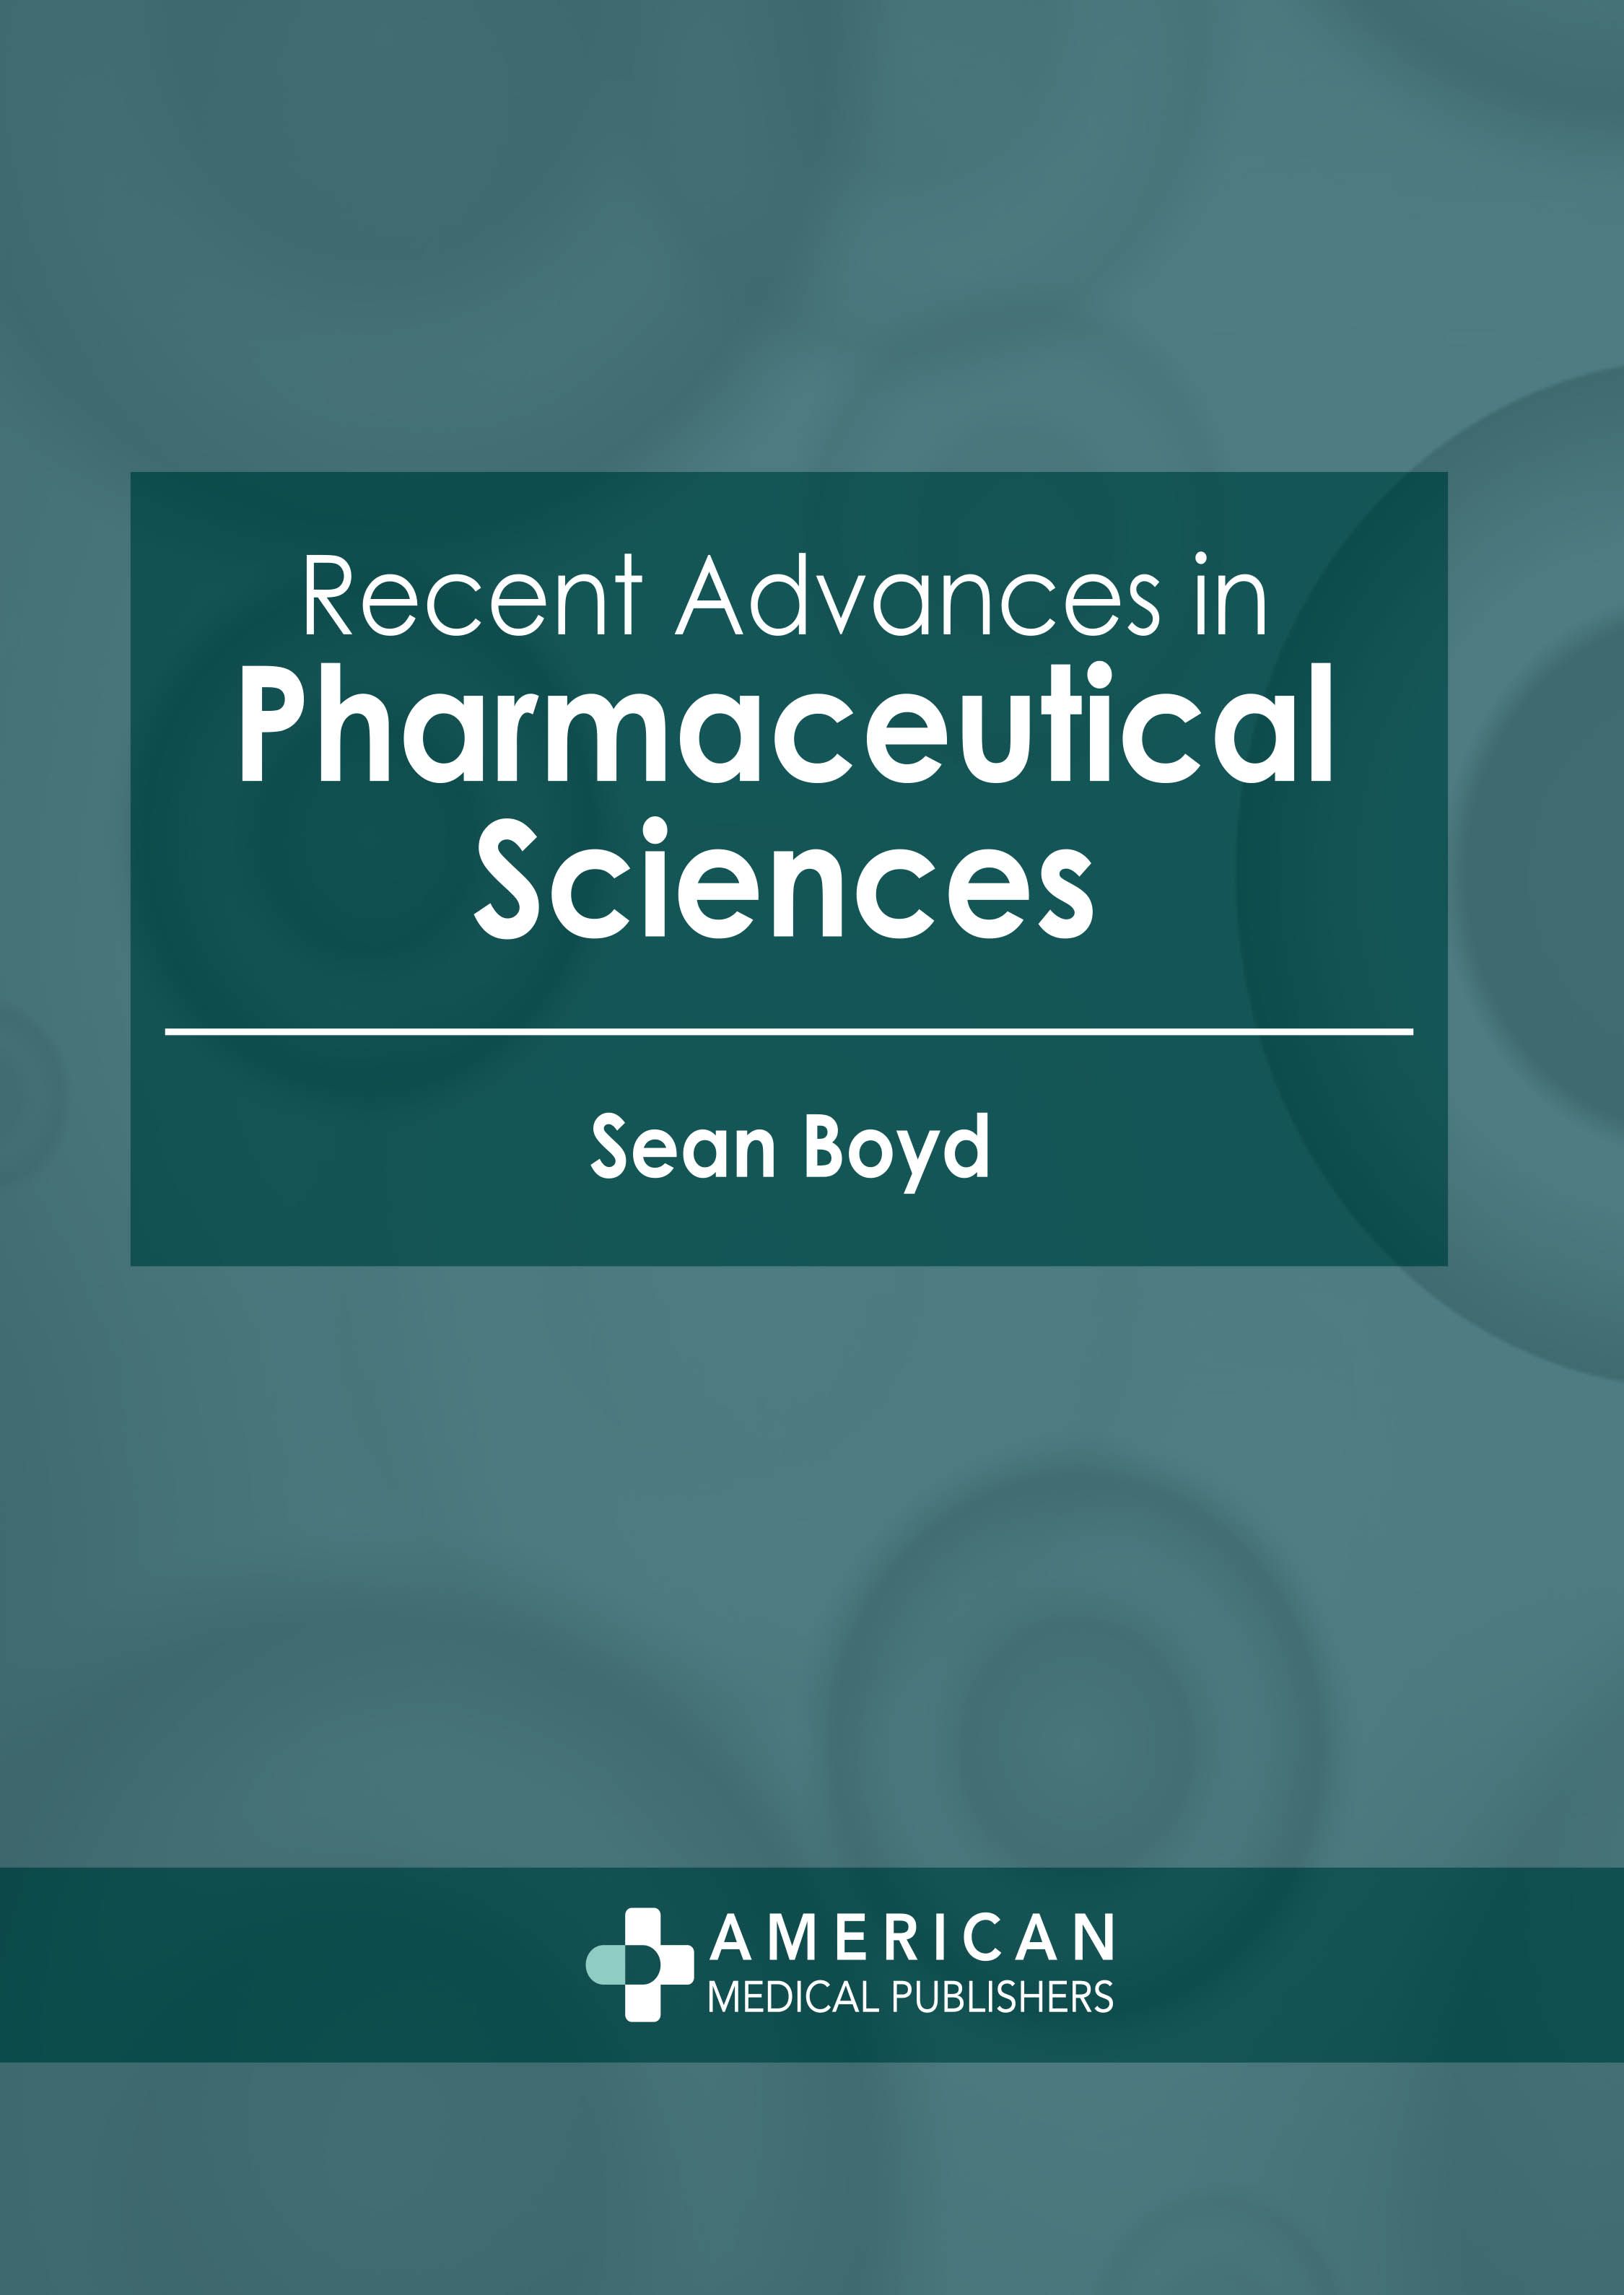 

exclusive-publishers/american-medical-publishers/recent-advances-in-pharmaceutical-sciences-9781639275526